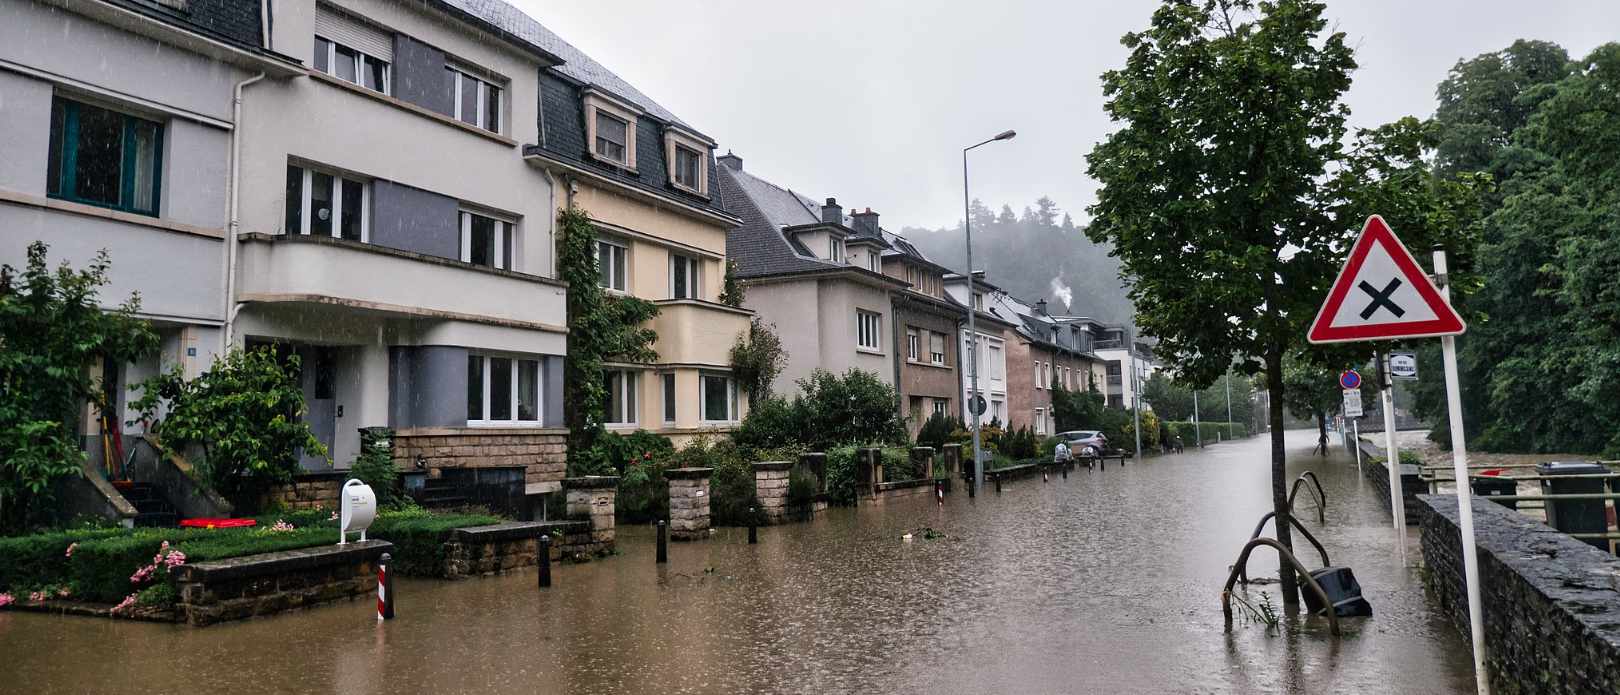 Flooded street in Clausen, Luxembourg